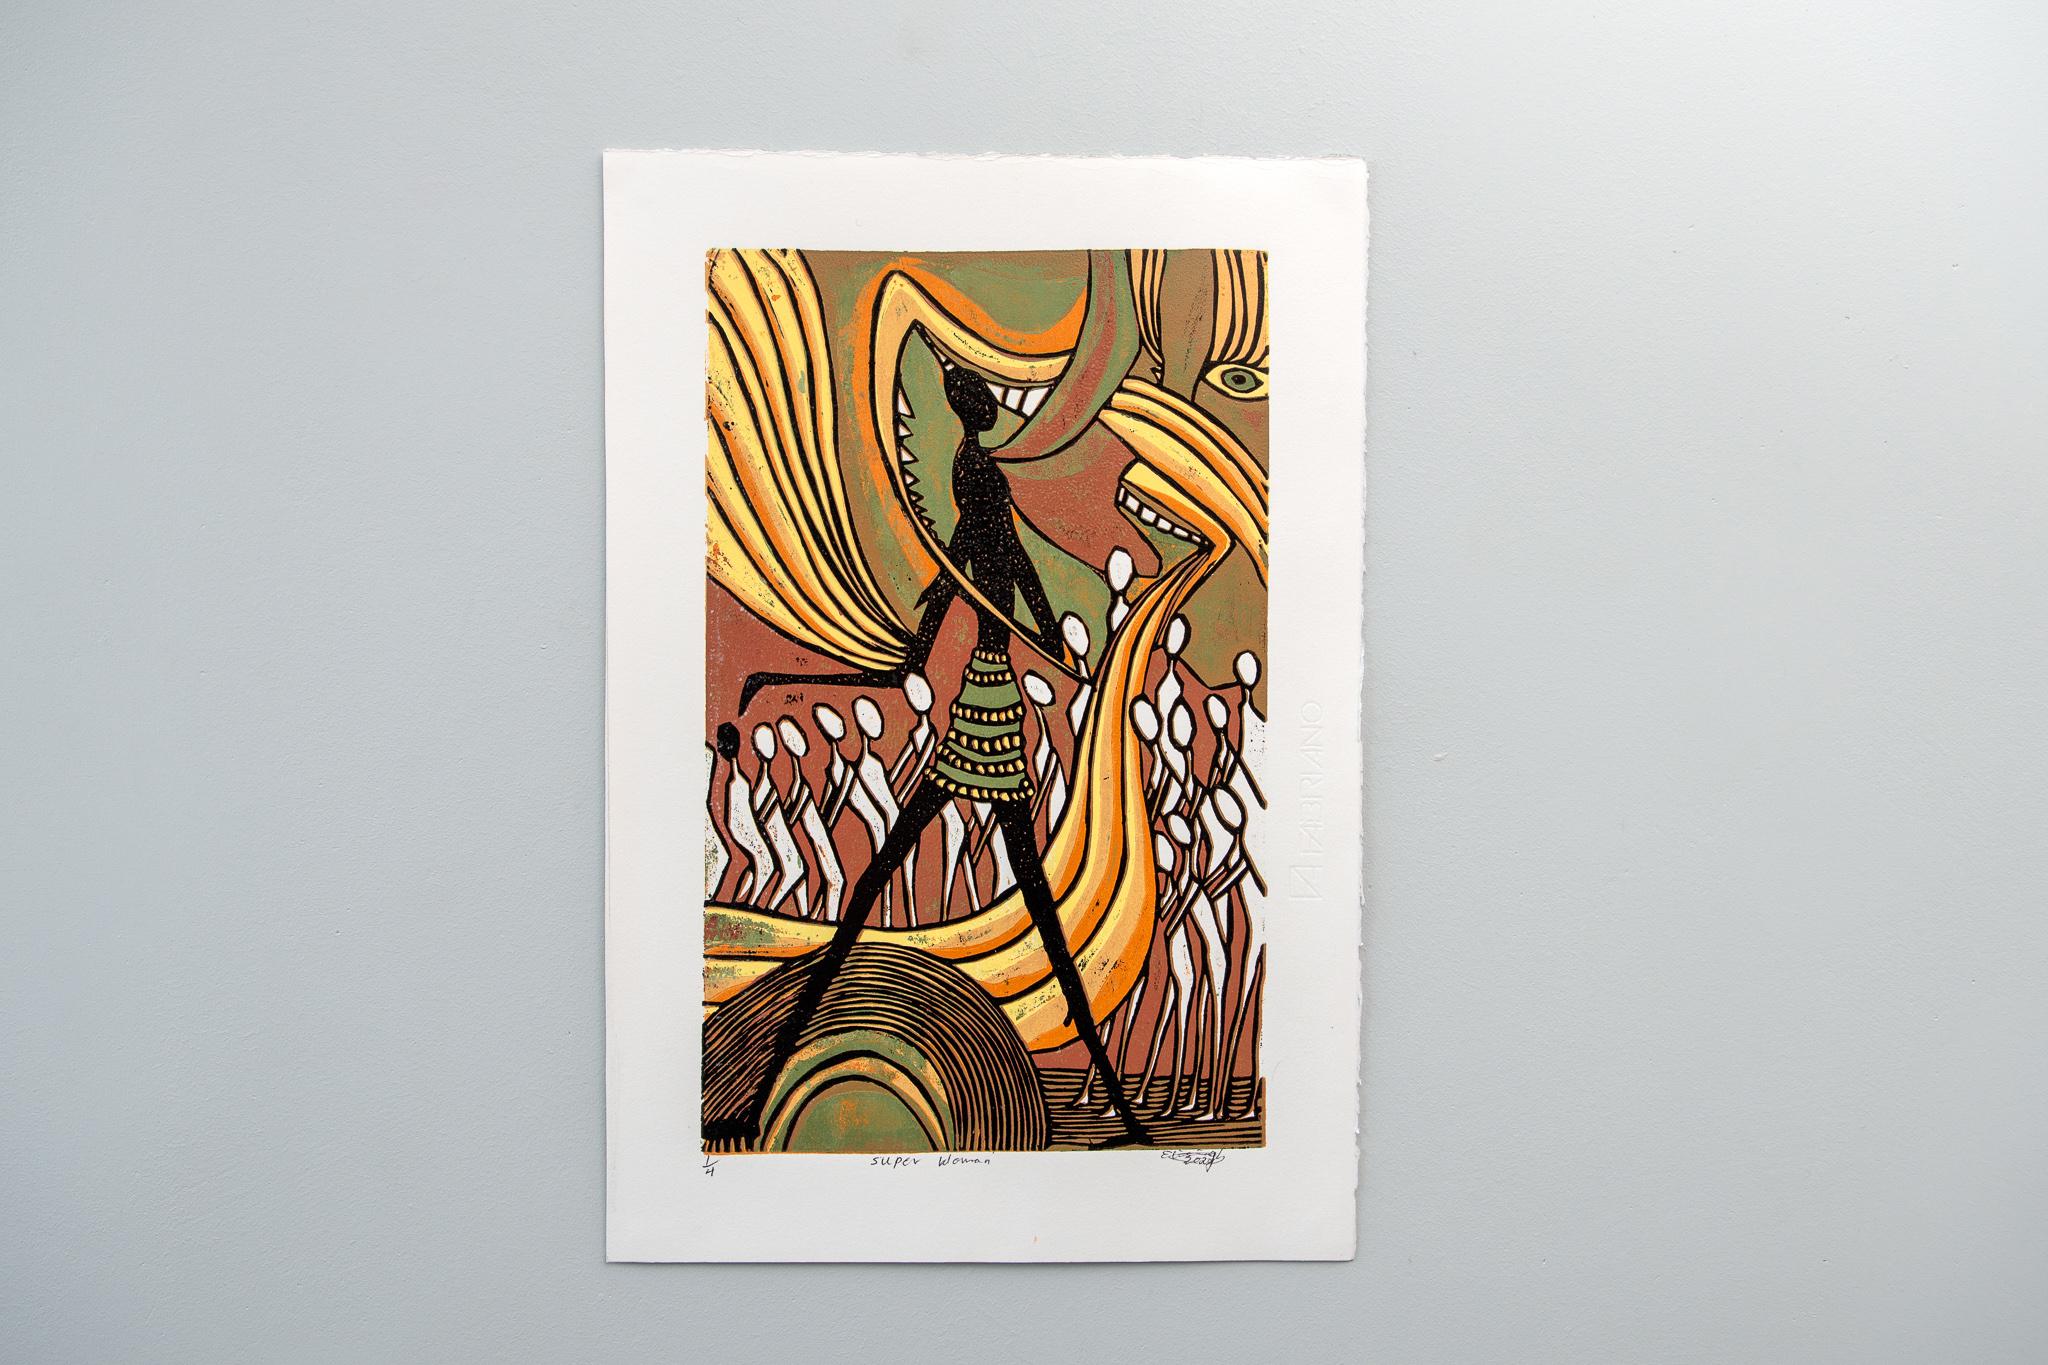 Super Woman, 2020. Cardboard block print on fabriano paper, 1/4

Elisia Nghidishange was born in Eenhana in northern Namibia. This printmaker, sculptor and mixed media artist graduated from the College of the Arts in Windhoek in 2016. Nghidishange